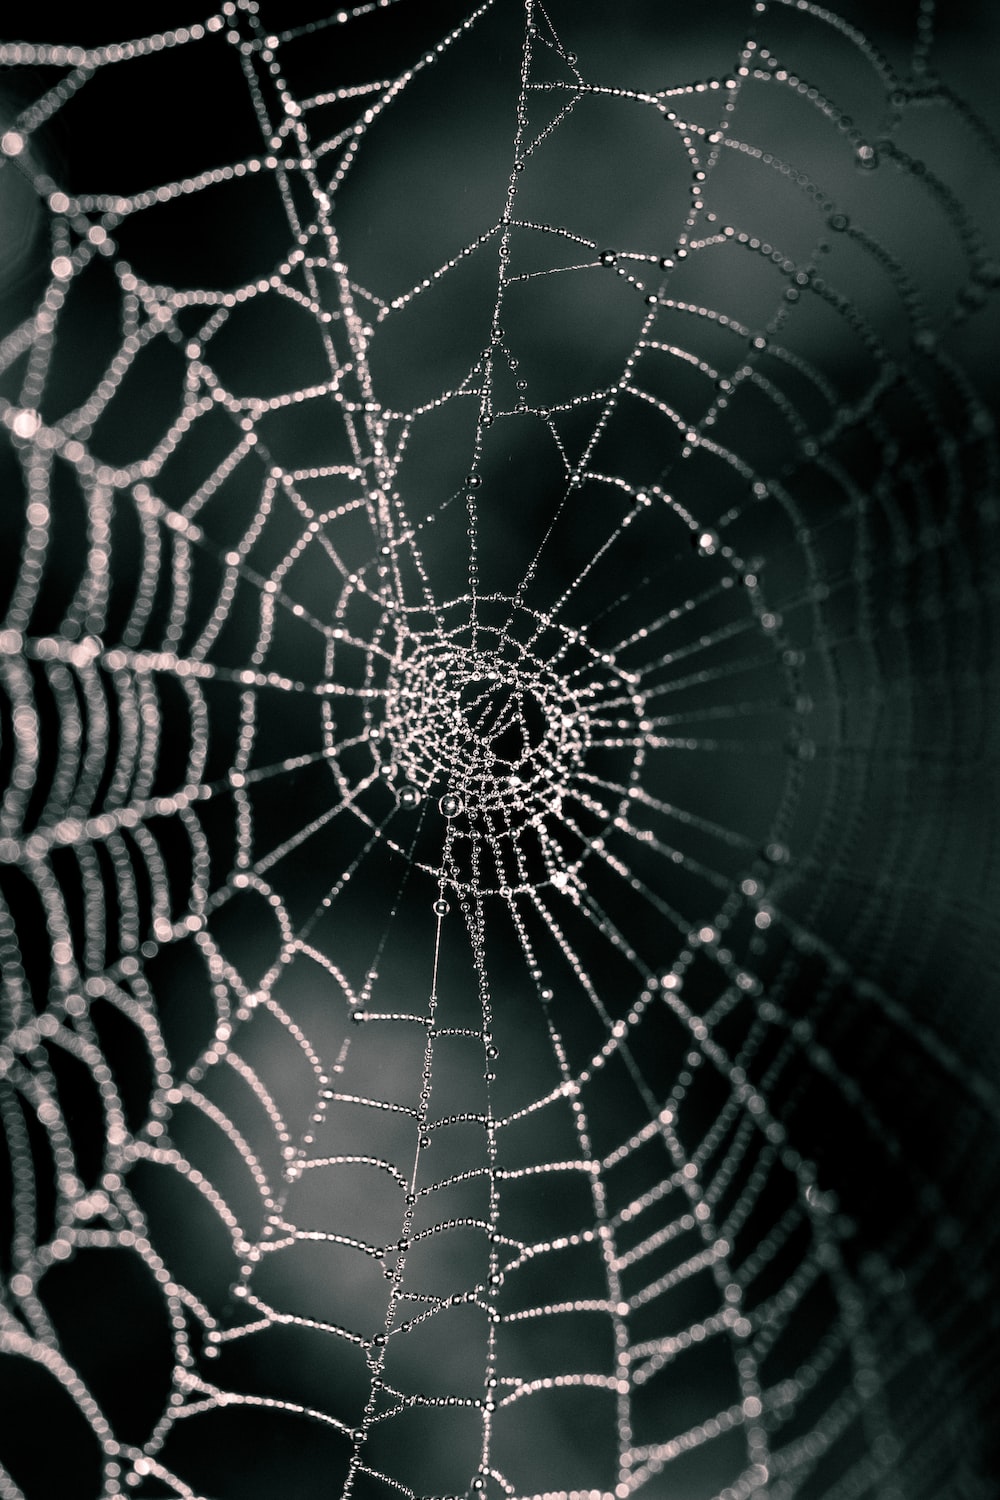 Spider Web Images  Free Photos, PNG Stickers, Wallpapers & Backgrounds -  rawpixel